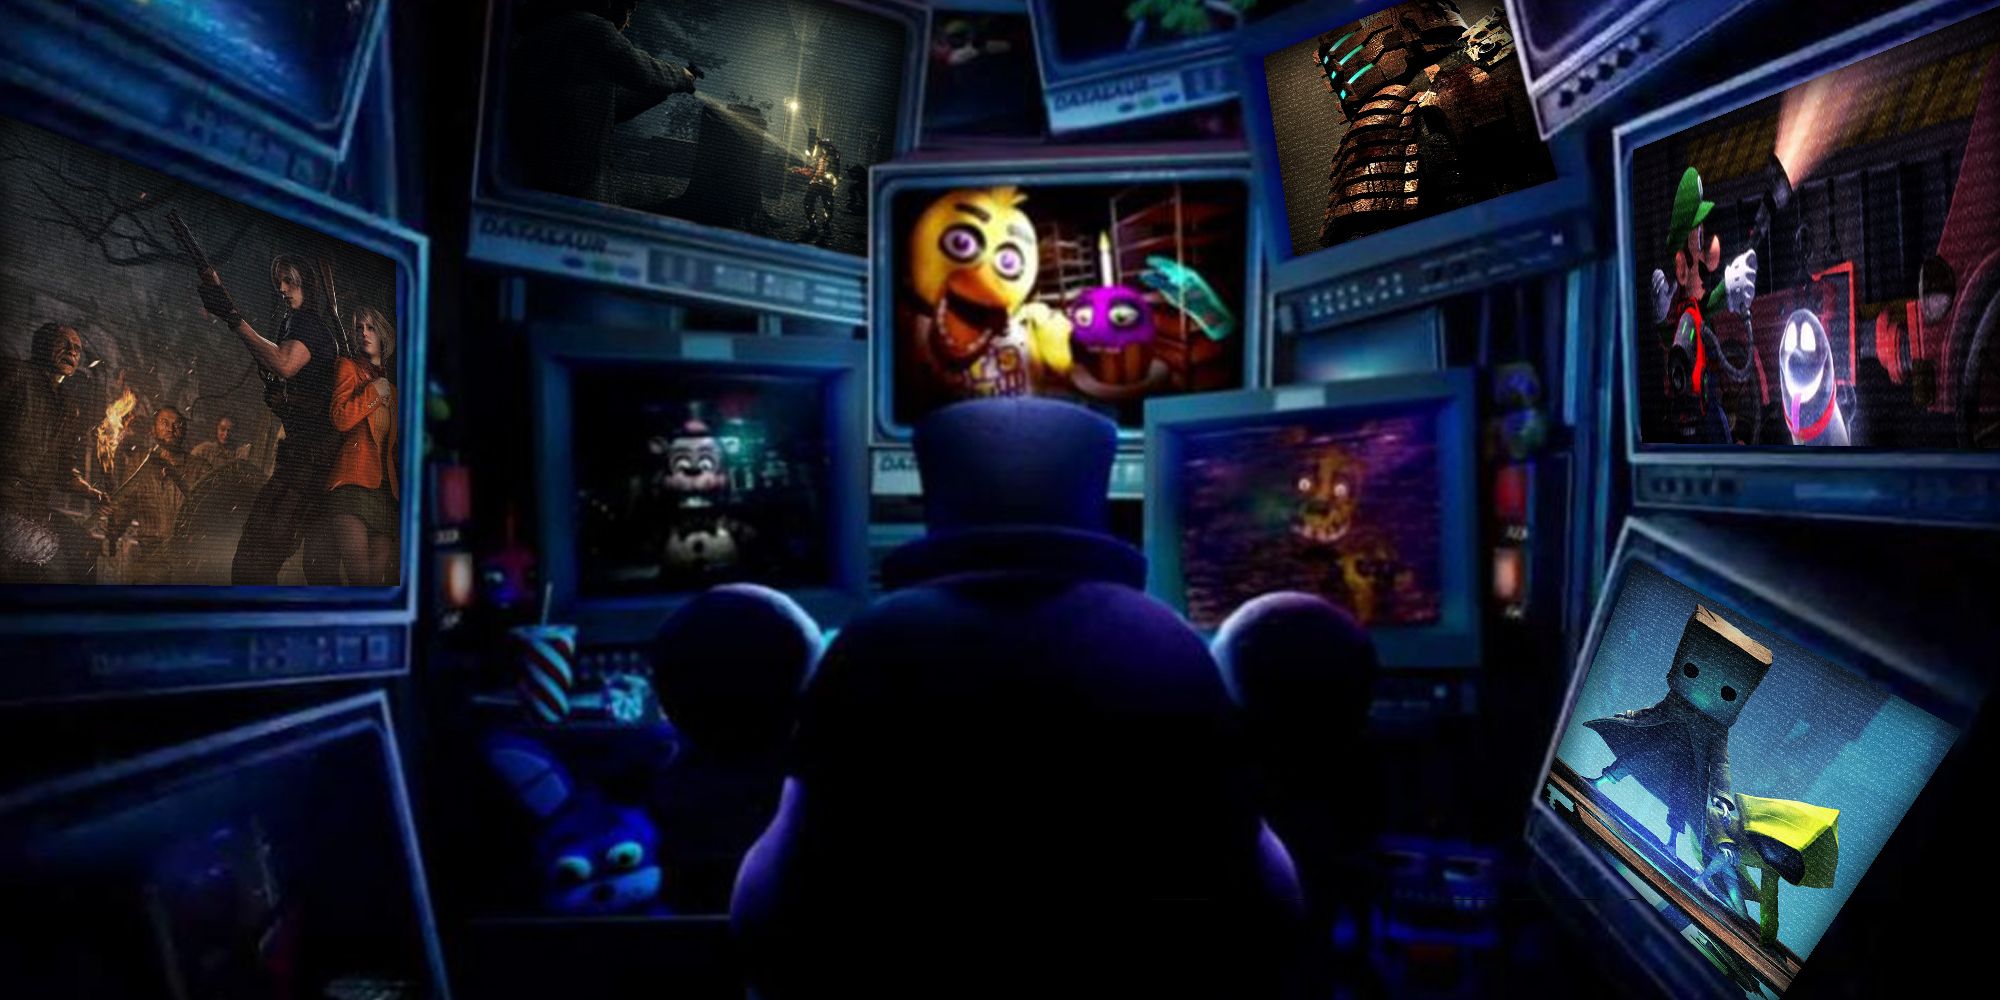 freddy watching horror games on lots of different screens from a control room